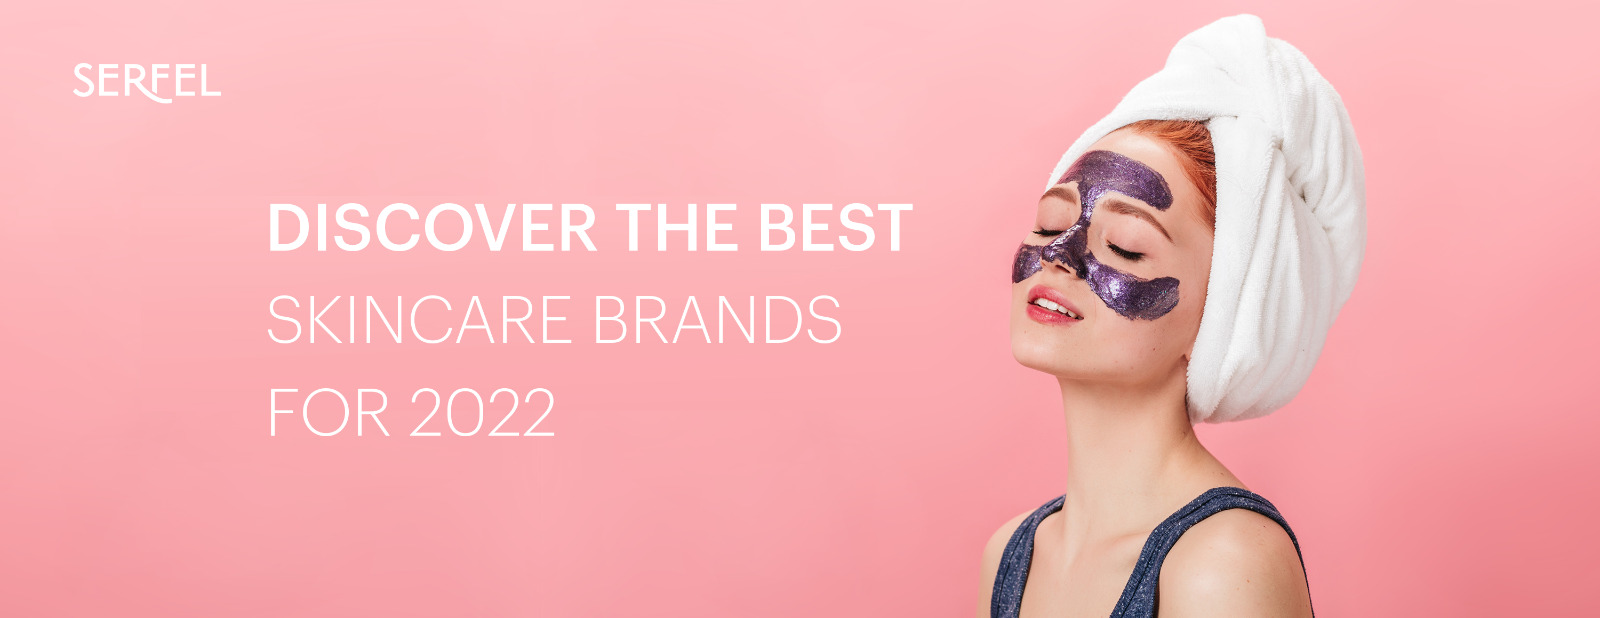 Discover The Best Skincare Brands for 2022